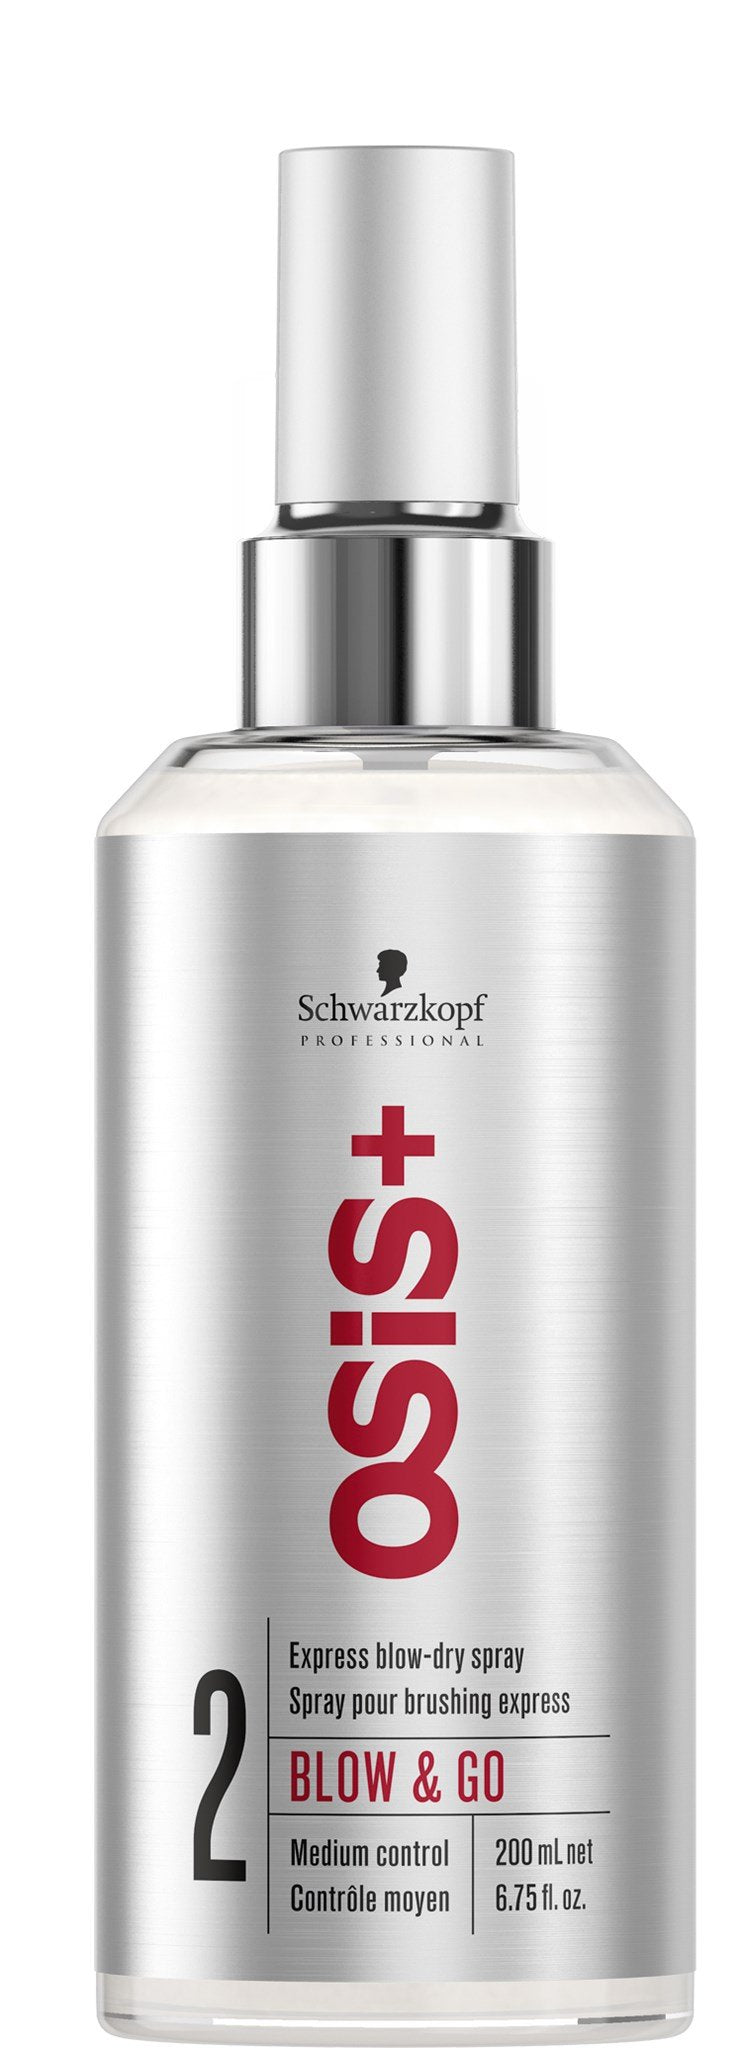 OSIS+ Blow &amp; Go Express Blow Dry Spray 200ML